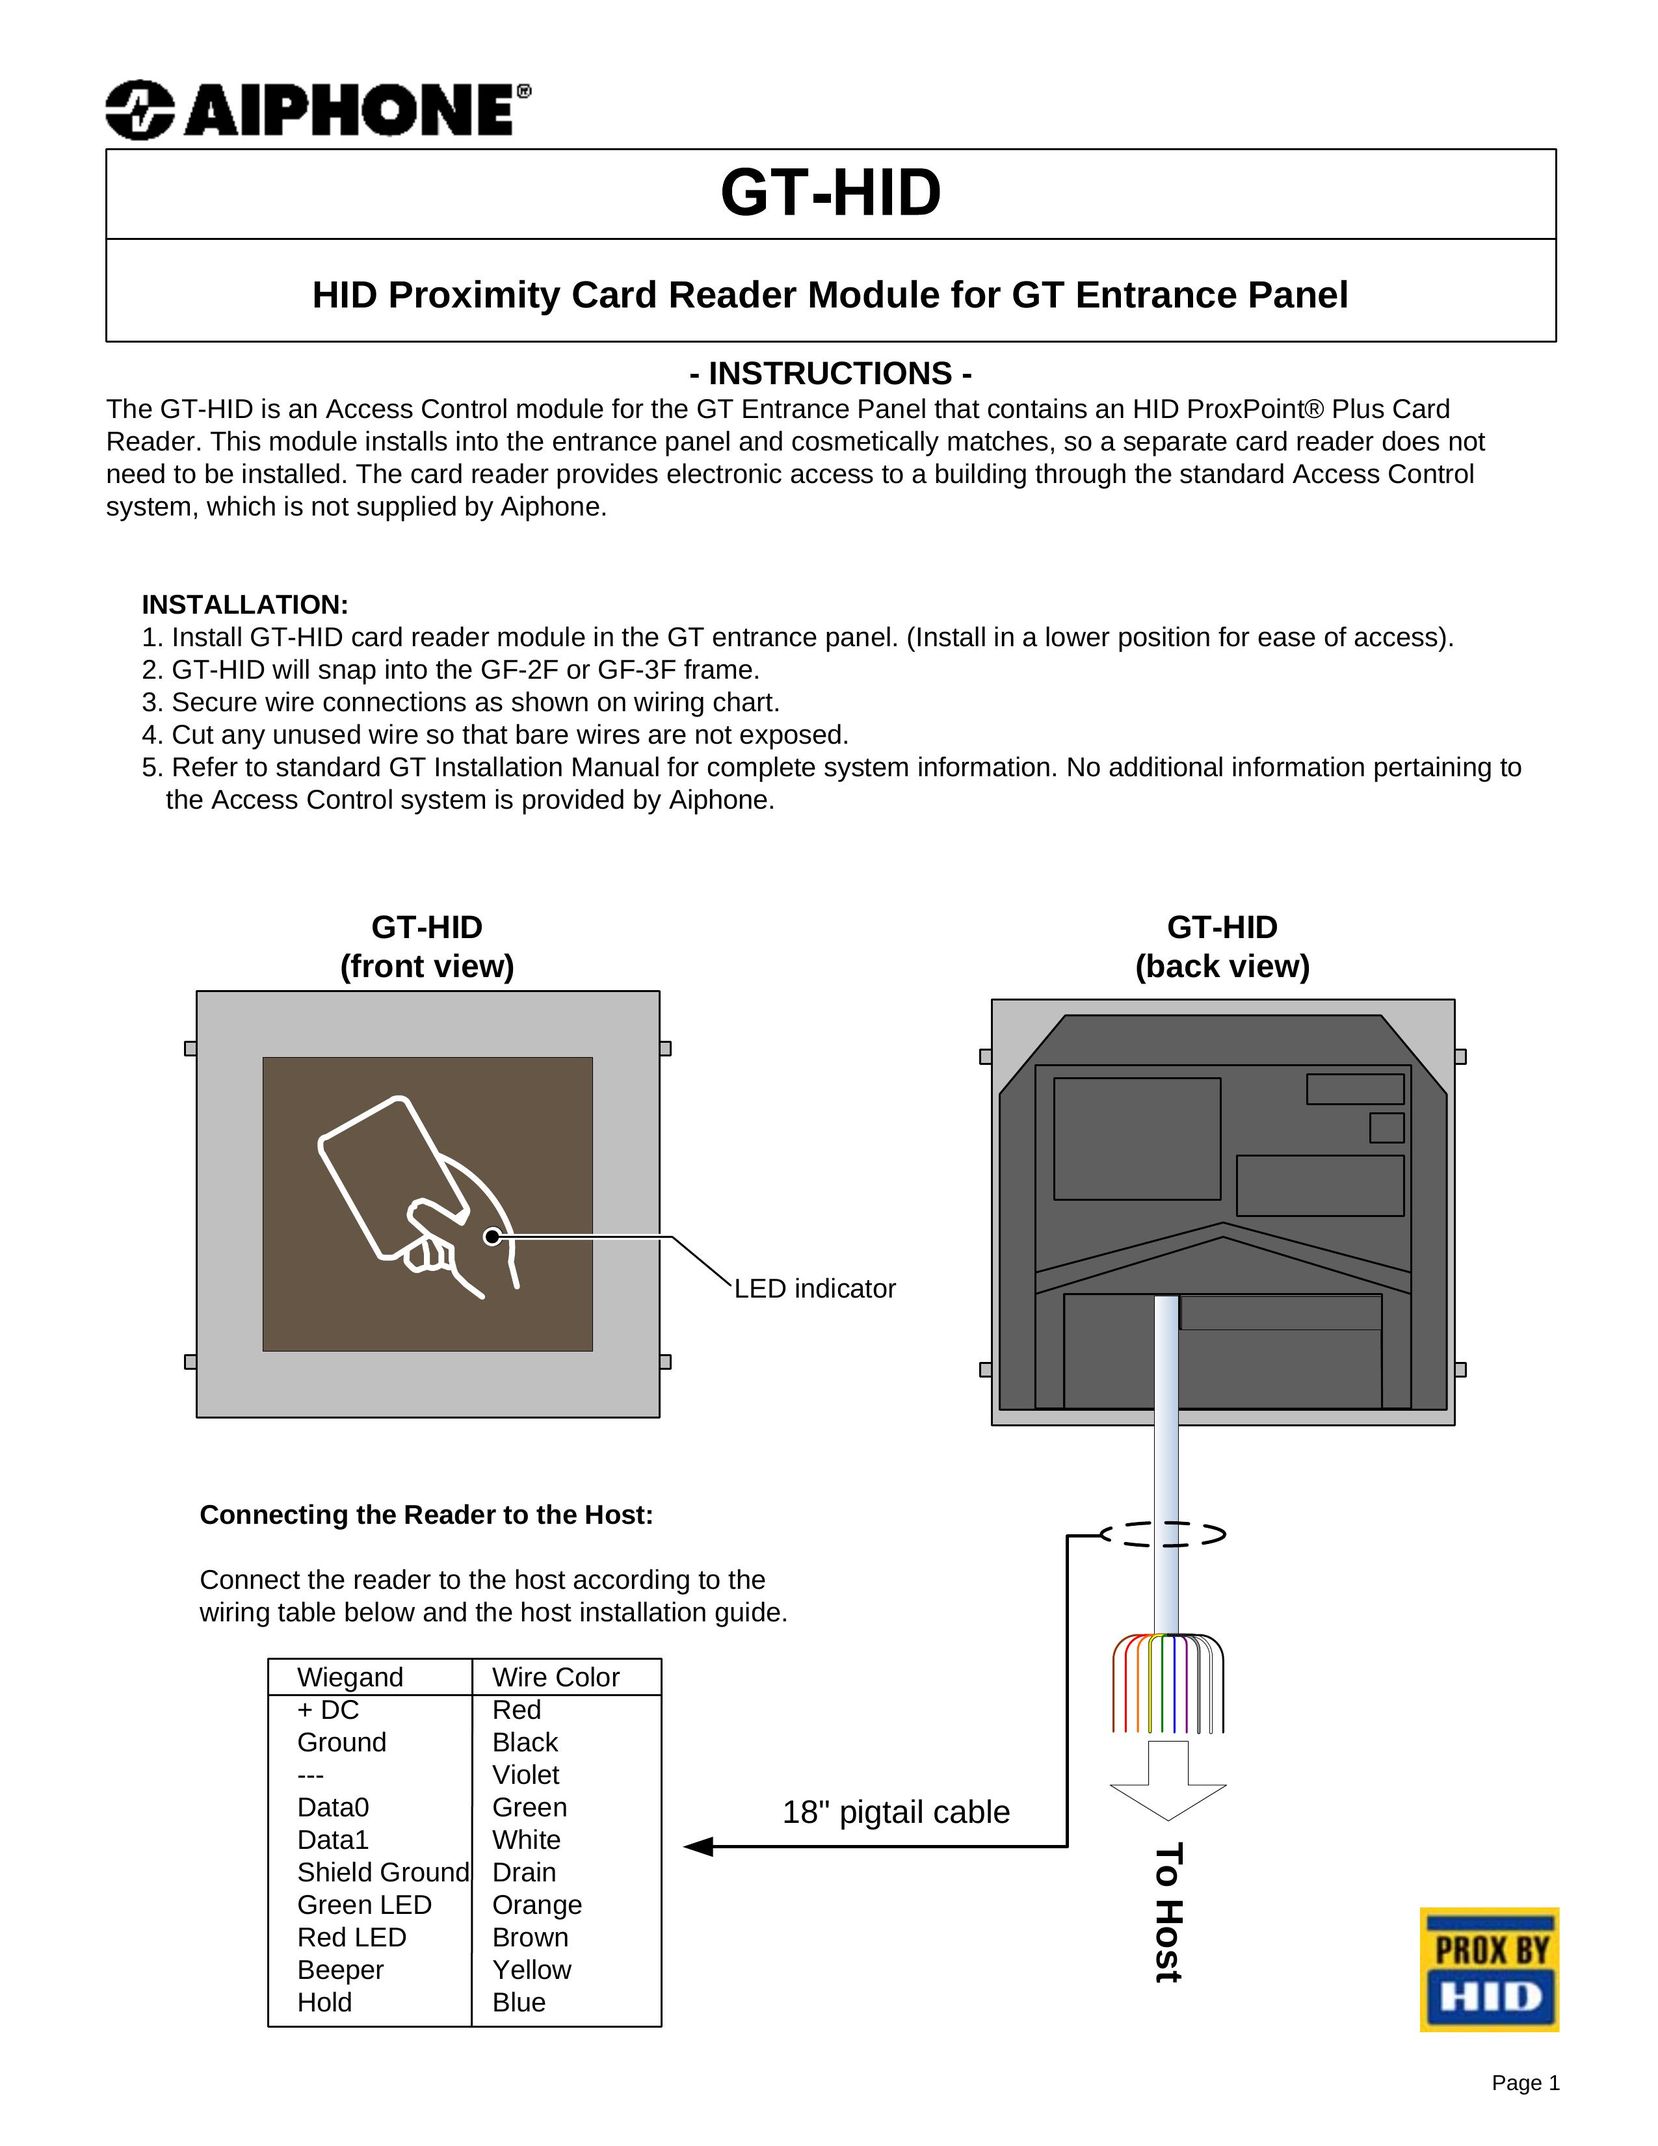 Aiphone GT-HID Card Game User Manual